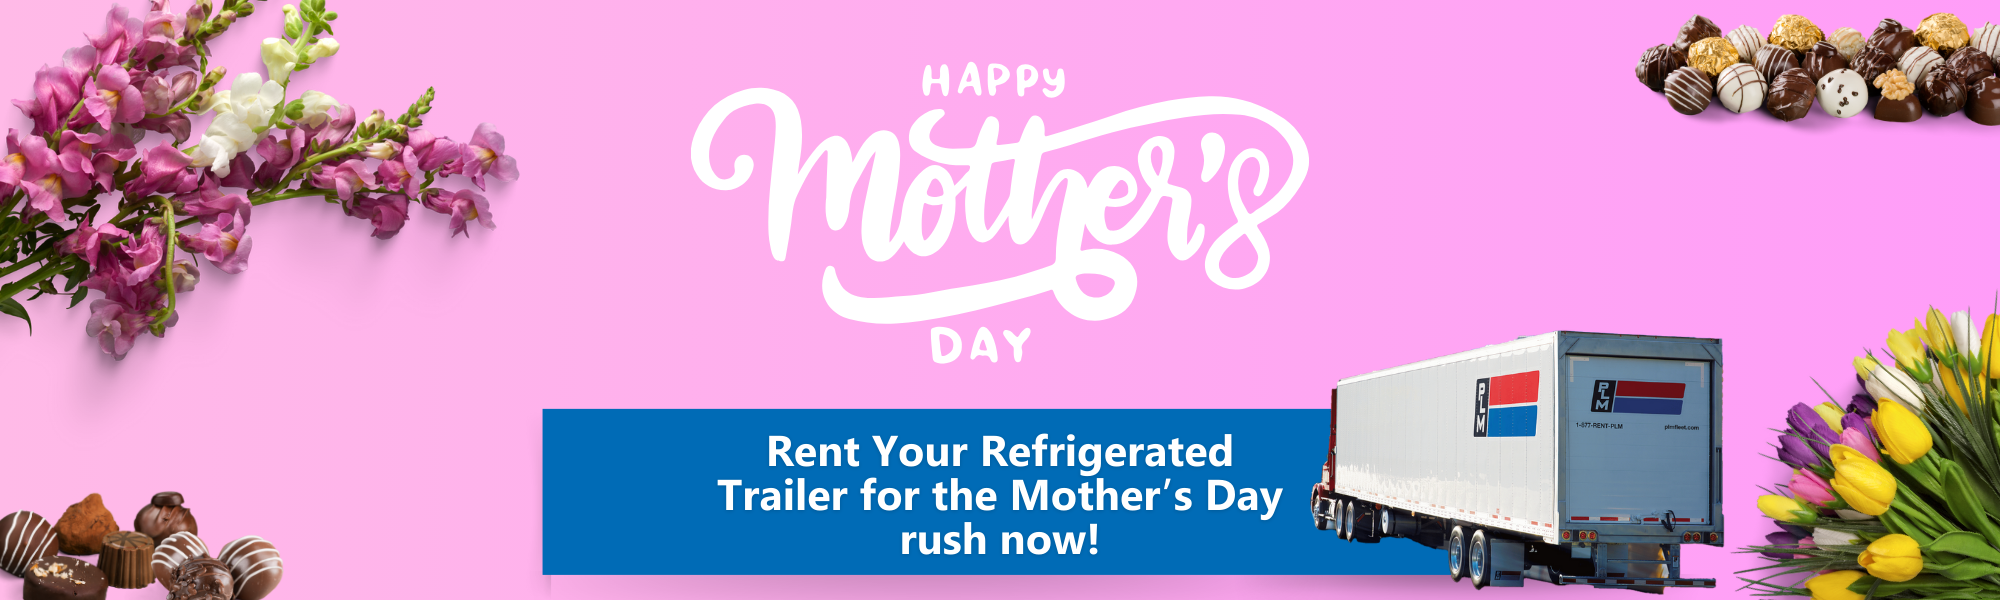 Rent Refrigerated Trailers for Mother's Day